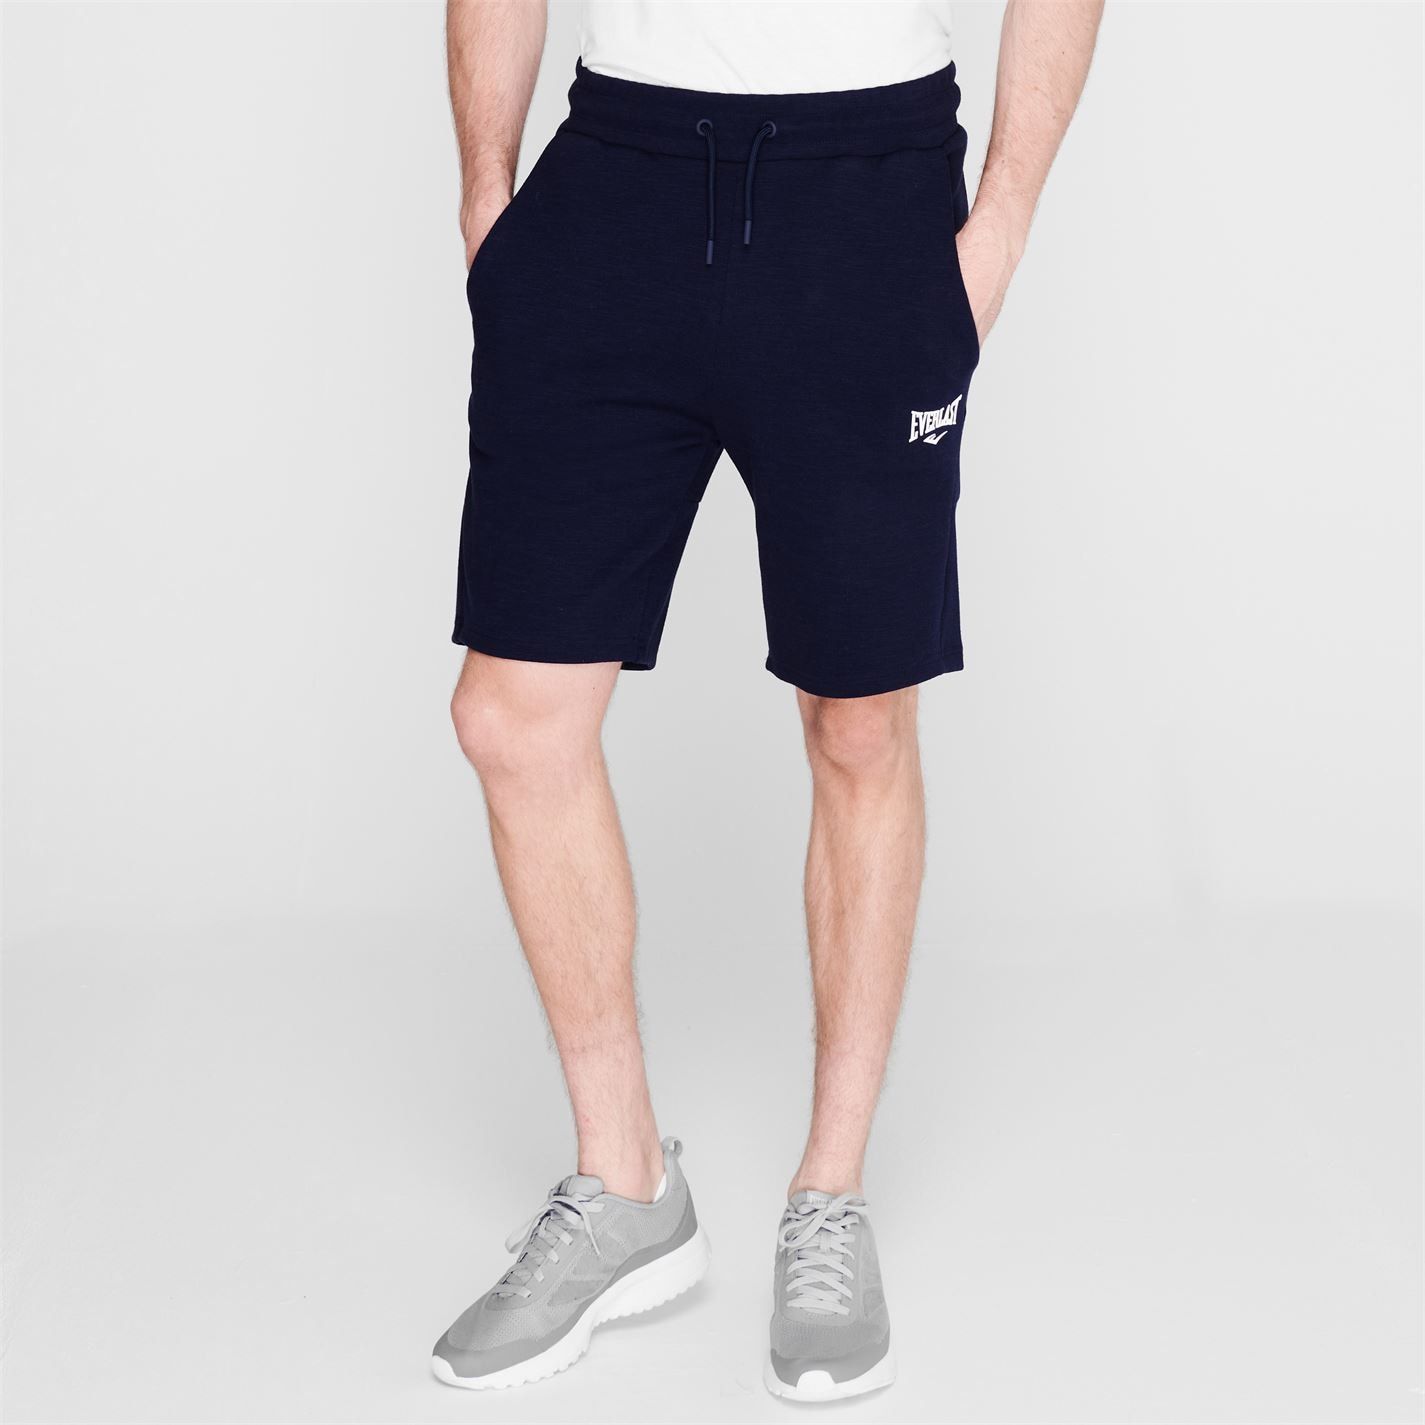 <strong>Everlast Fleece Shorts Mens</strong><br><br> The Mens Everlast Fleece Shorts are perfect for everyday wear, crafted with an elasticated waistband with an adjustable drawcord for a secure fit, a soft fleece lining gives a warm feel and the Everlast branding completes the look.<br>> Mens shorts<br>> Elasticated waistband<br>> Adjustable drawcord<br>> Soft fleece lining<br>> Two open pockets<br>> Everlast branding<br>> 70% cotton, 30% polyester<br>> Machine washable<br>> Keep away from fire